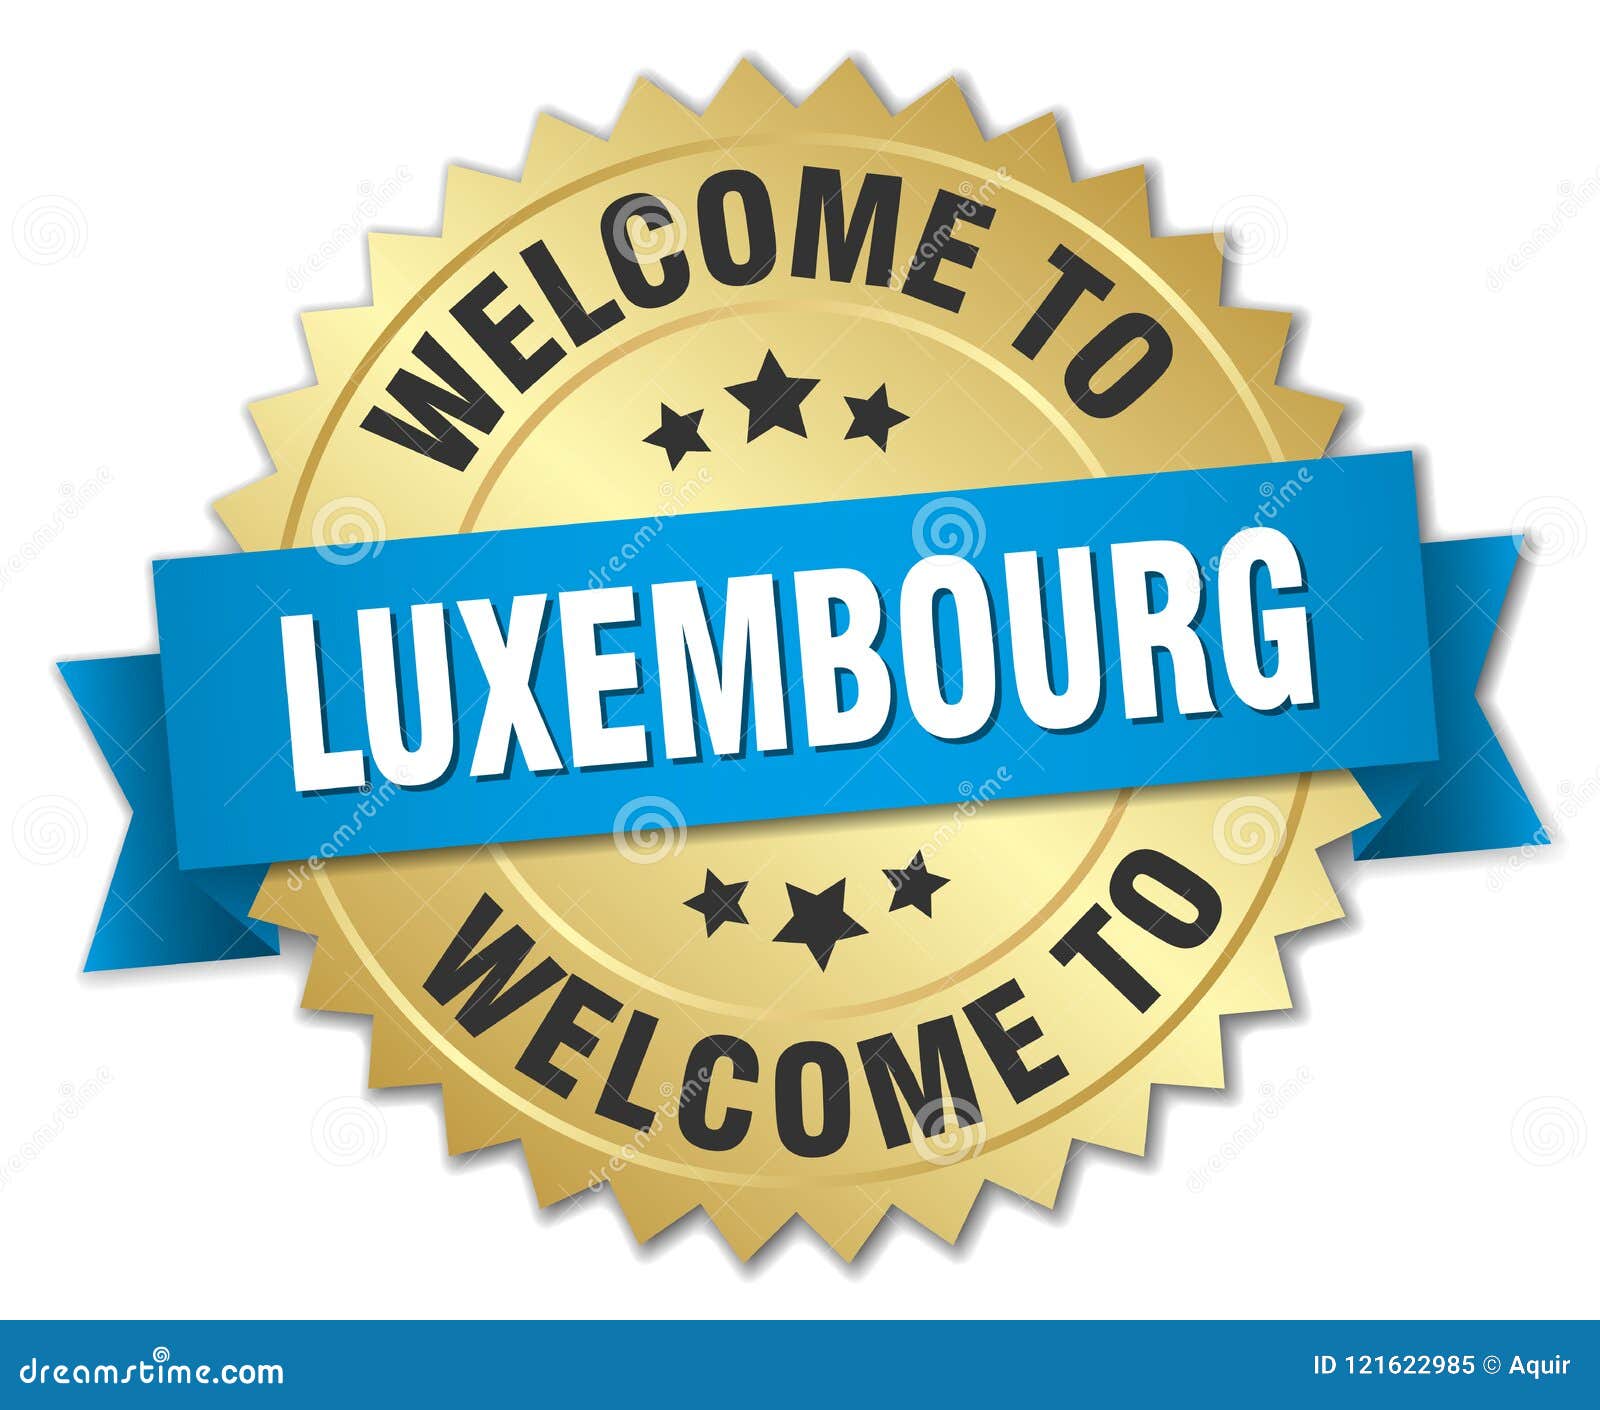 visit luxembourg logo